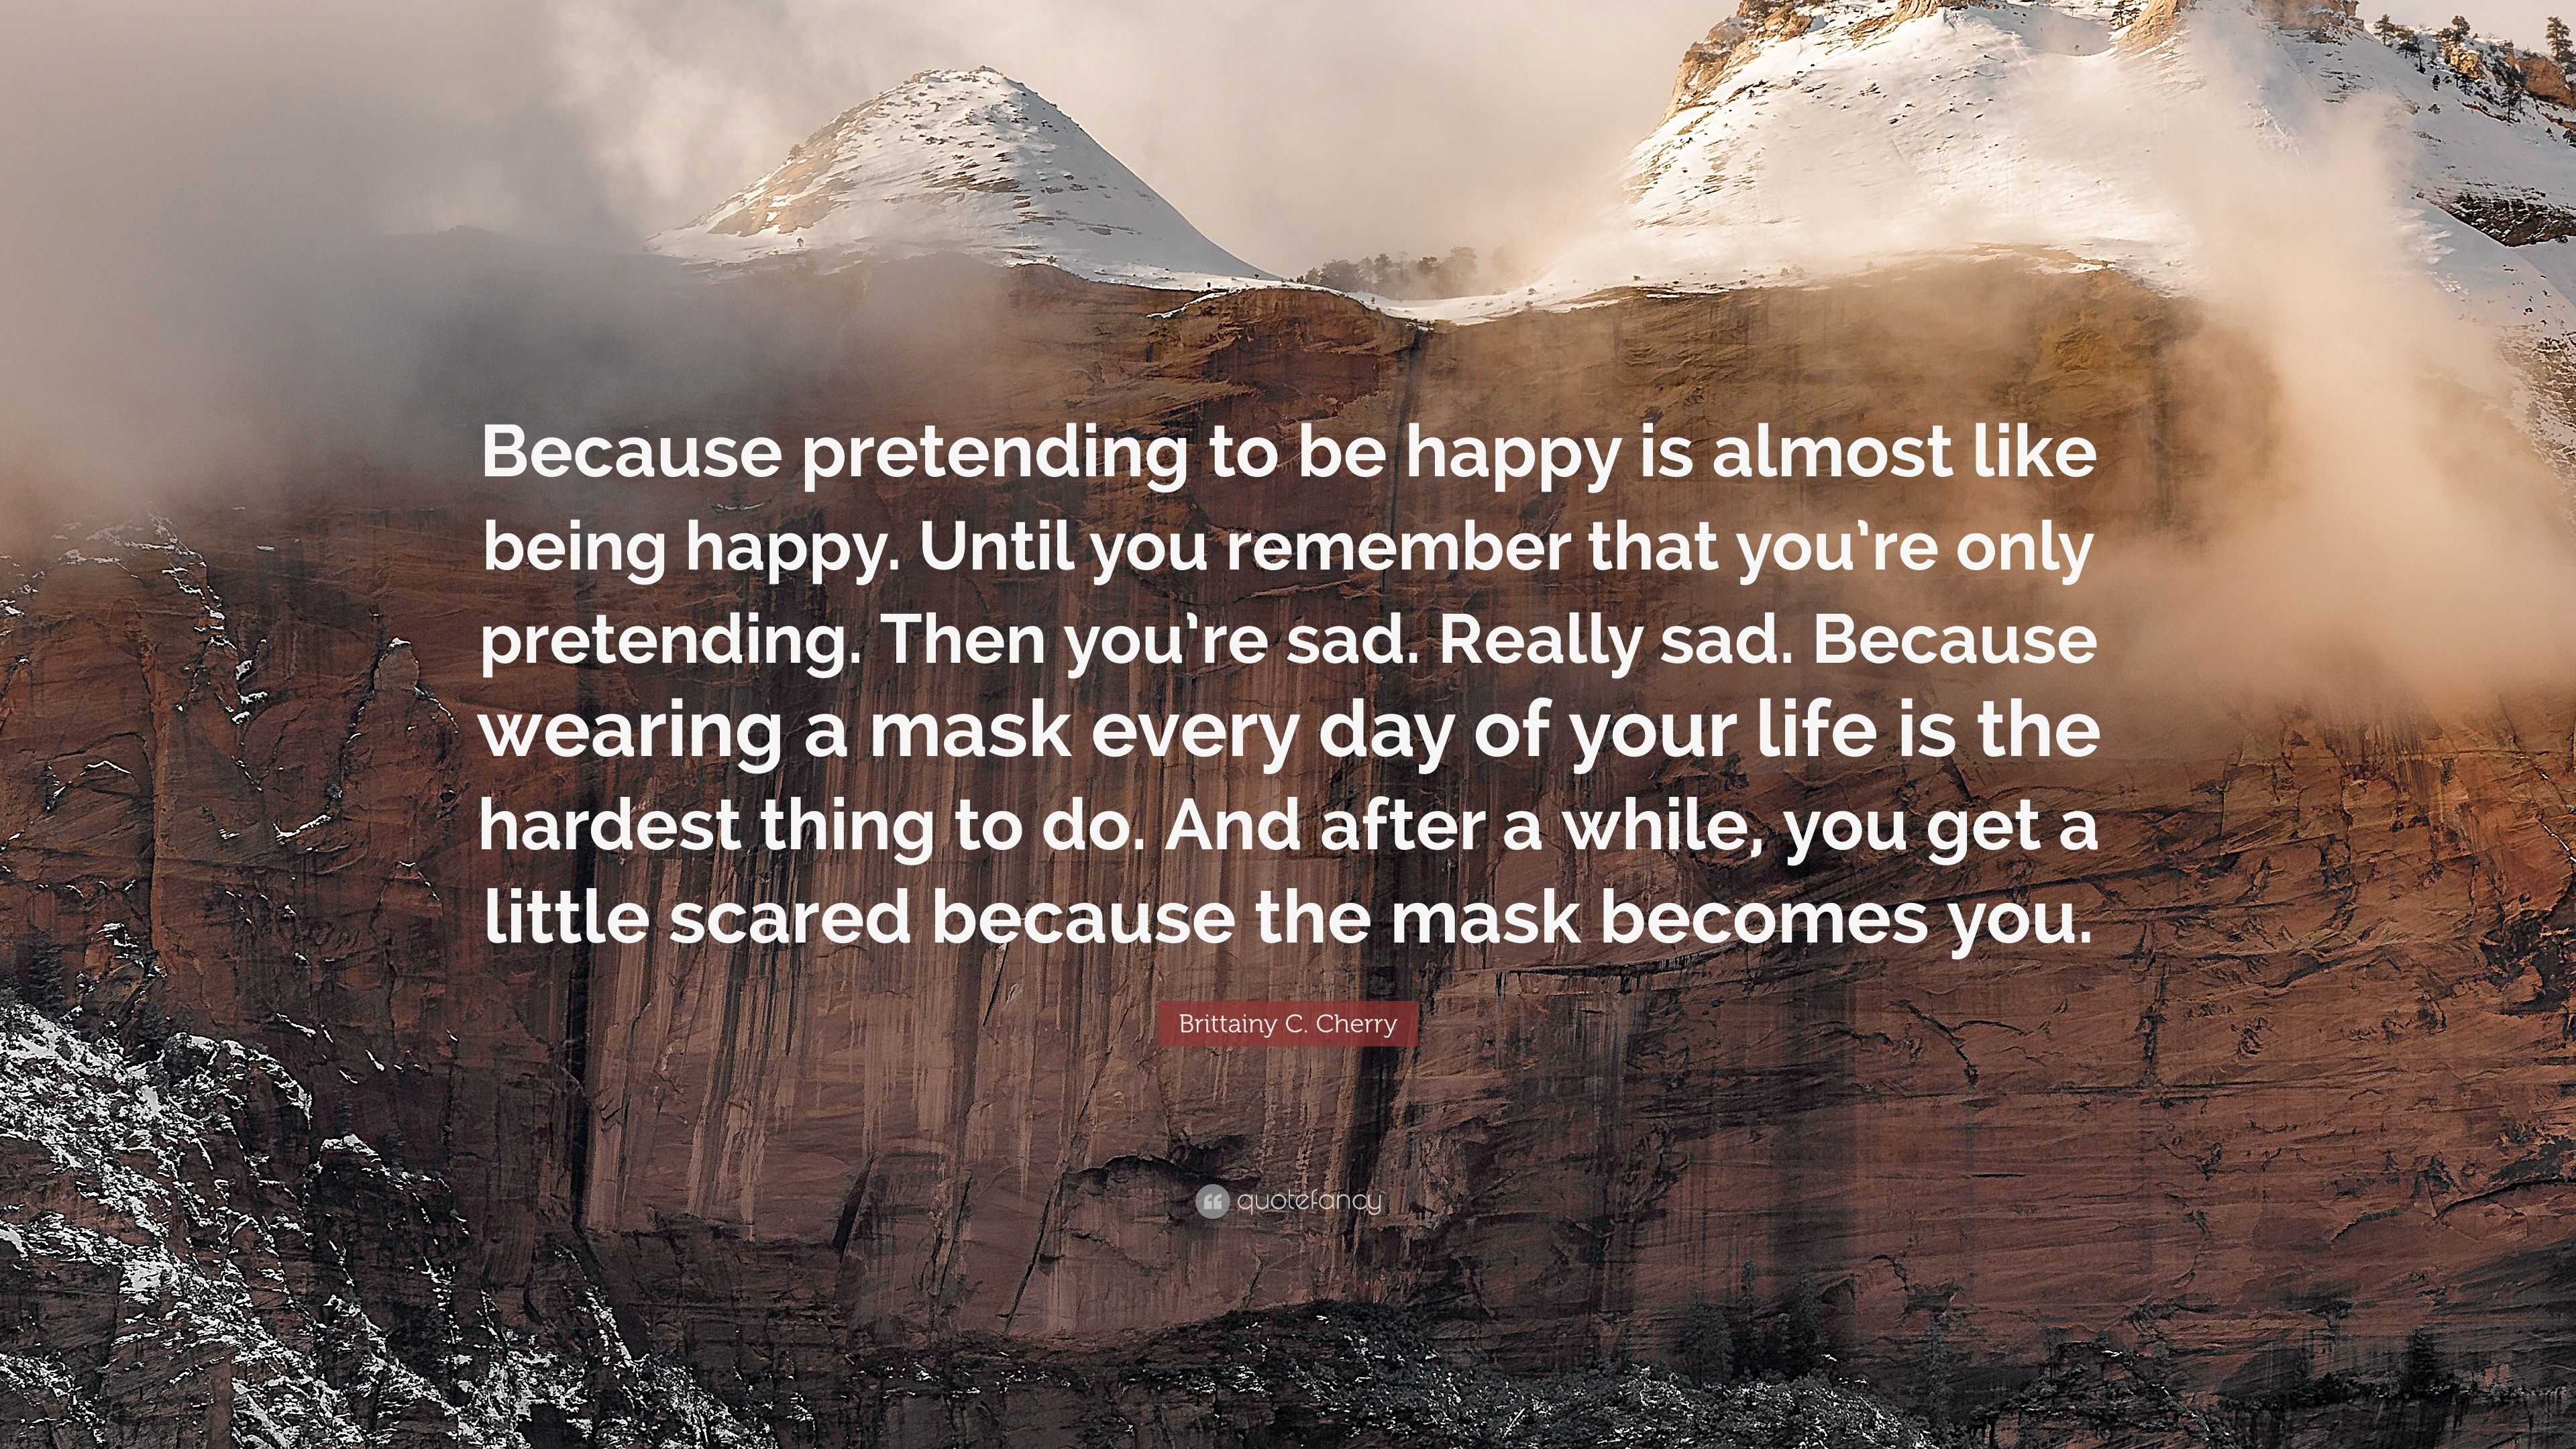 Are You Pretending to Be Happy?